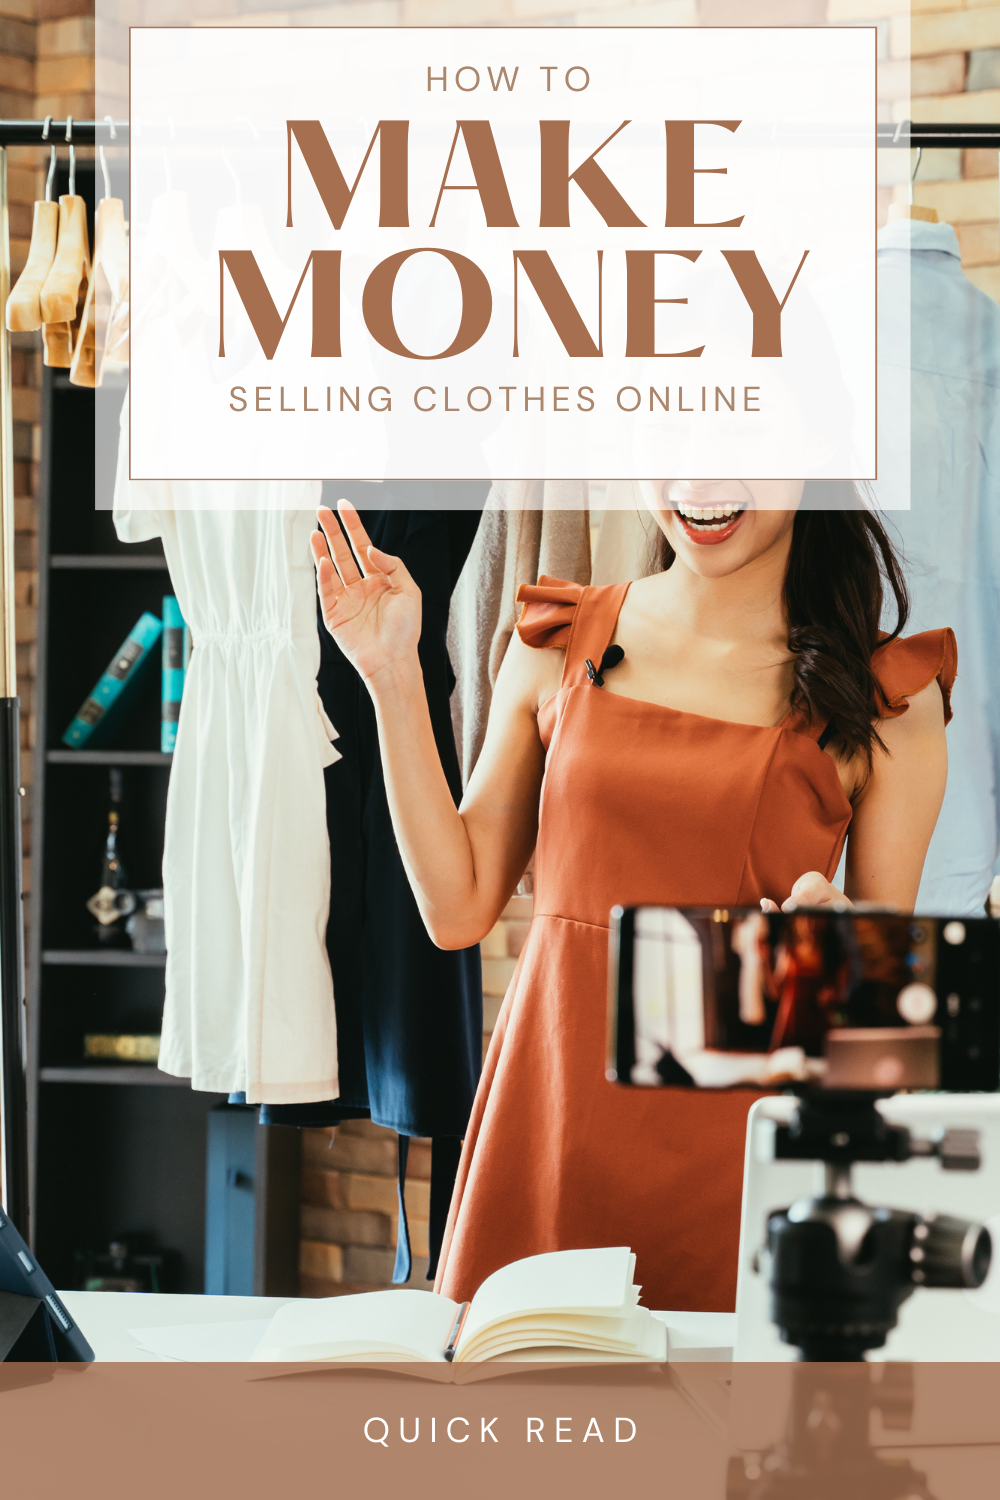 Turn Your Closet into Cash: The Ultimate Guide to Selling Clothes